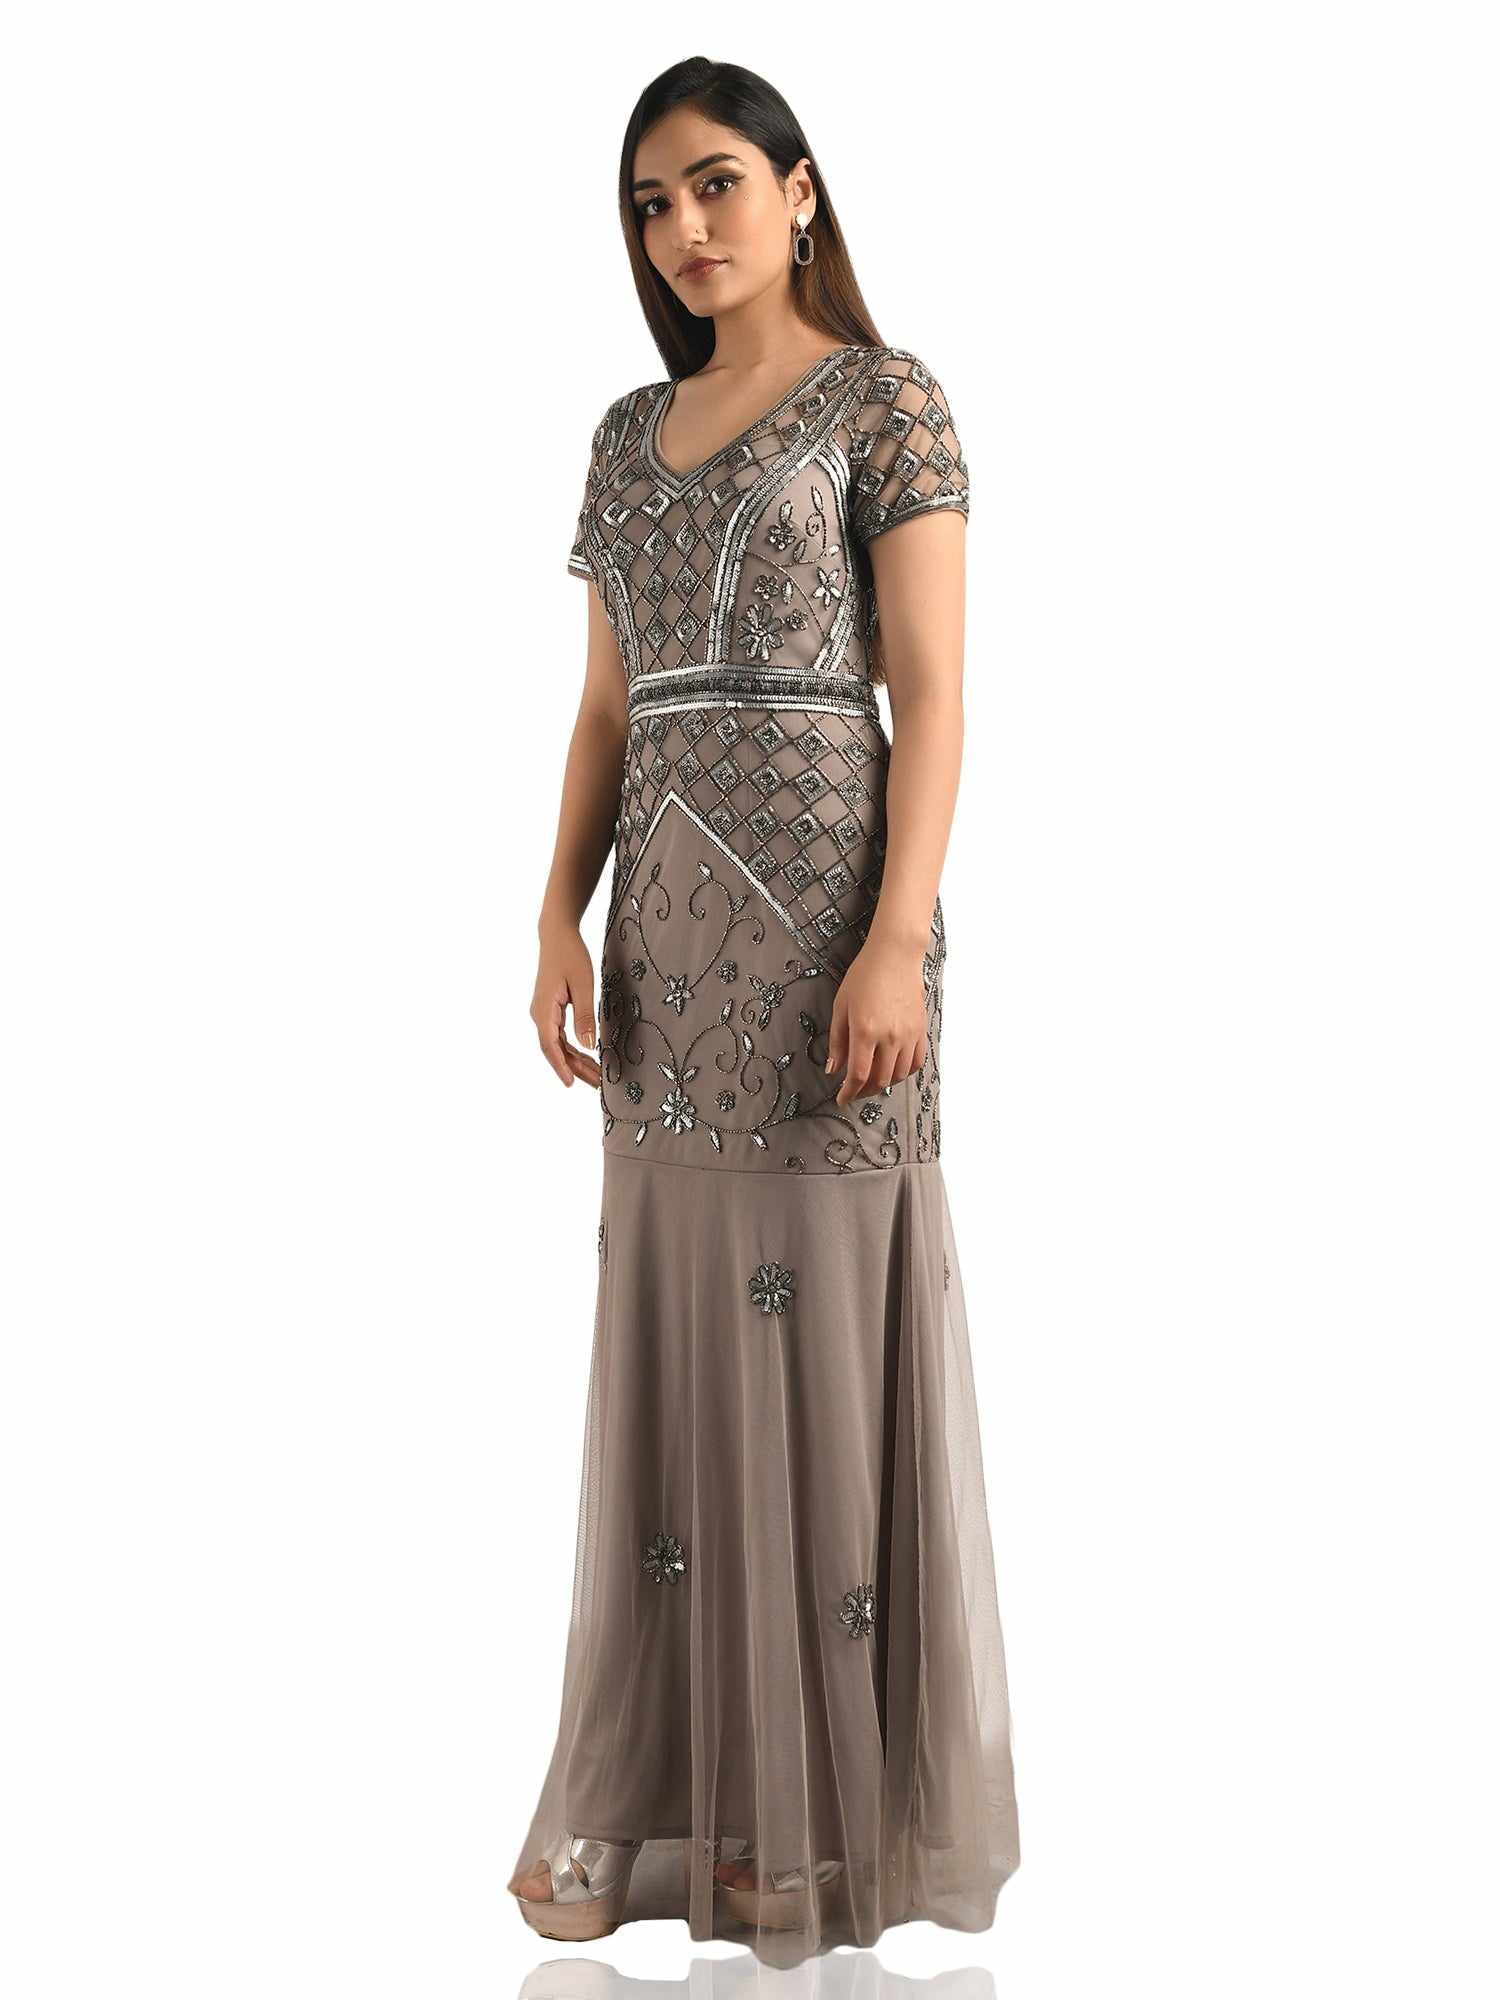 embellished gown with diamond motif